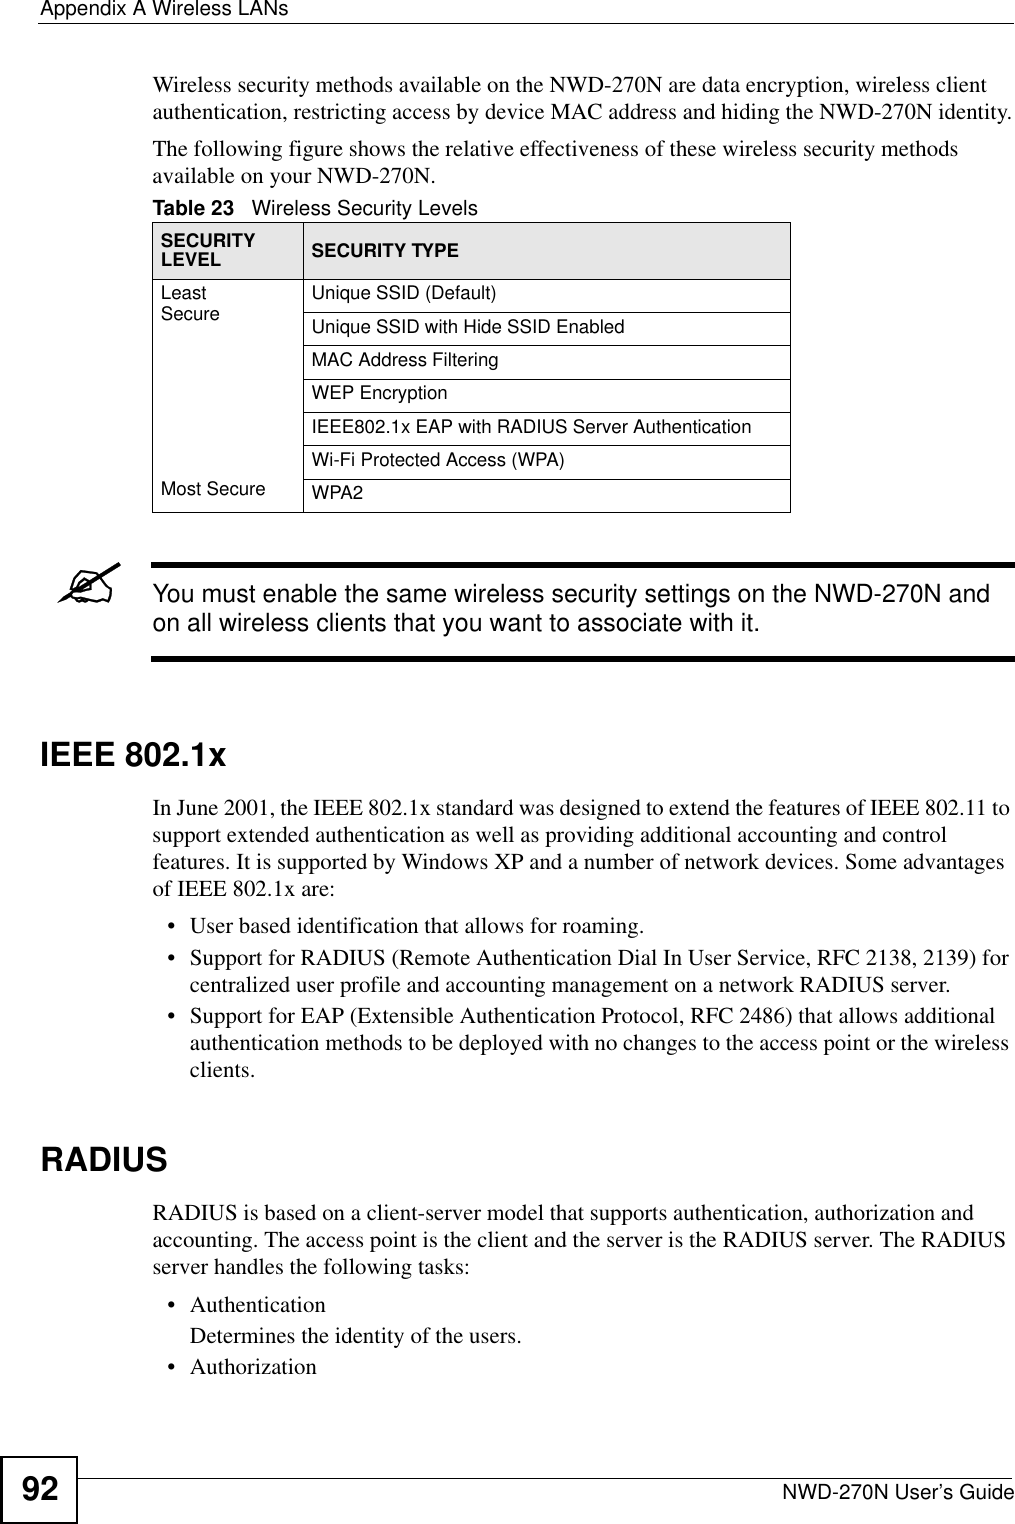 Appendix A Wireless LANsNWD-270N User’s Guide92Wireless security methods available on the NWD-270N are data encryption, wireless client authentication, restricting access by device MAC address and hiding the NWD-270N identity.The following figure shows the relative effectiveness of these wireless security methods available on your NWD-270N.&quot;You must enable the same wireless security settings on the NWD-270N and on all wireless clients that you want to associate with it. IEEE 802.1xIn June 2001, the IEEE 802.1x standard was designed to extend the features of IEEE 802.11 to support extended authentication as well as providing additional accounting and control features. It is supported by Windows XP and a number of network devices. Some advantages of IEEE 802.1x are:• User based identification that allows for roaming.• Support for RADIUS (Remote Authentication Dial In User Service, RFC 2138, 2139) for centralized user profile and accounting management on a network RADIUS server. • Support for EAP (Extensible Authentication Protocol, RFC 2486) that allows additional authentication methods to be deployed with no changes to the access point or the wireless clients. RADIUSRADIUS is based on a client-server model that supports authentication, authorization and accounting. The access point is the client and the server is the RADIUS server. The RADIUS server handles the following tasks:• Authentication Determines the identity of the users.• AuthorizationTable 23   Wireless Security LevelsSECURITY LEVEL SECURITY TYPELeast       S e c u r e                                                                                      Most SecureUnique SSID (Default)Unique SSID with Hide SSID EnabledMAC Address FilteringWEP EncryptionIEEE802.1x EAP with RADIUS Server AuthenticationWi-Fi Protected Access (WPA)WPA2